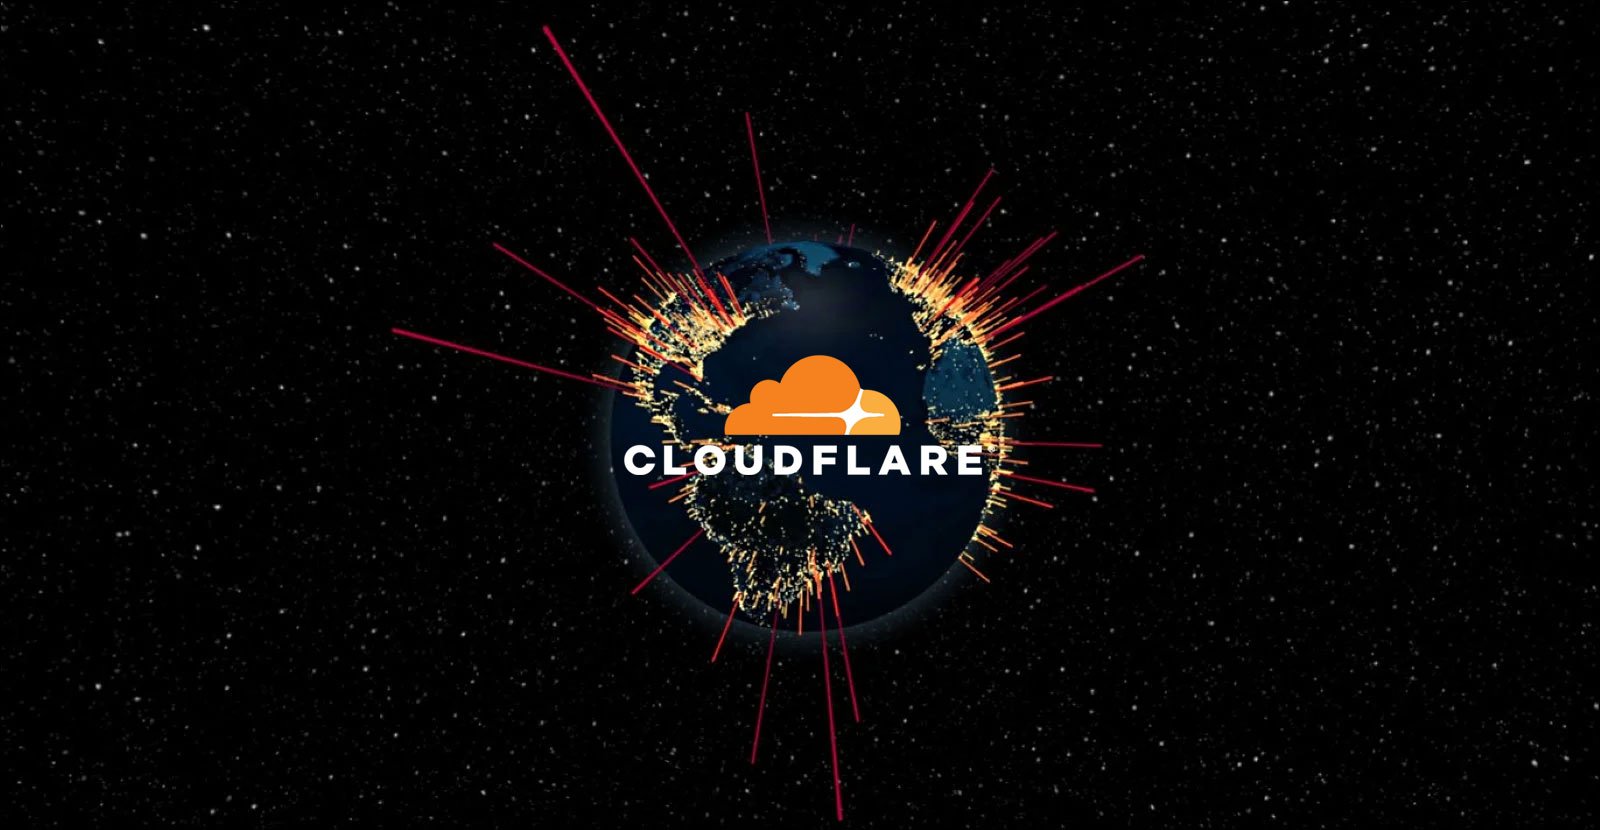 Cloudflare DDoS protections ironically bypassed using Cloudflare – Source: www.bleepingcomputer.com